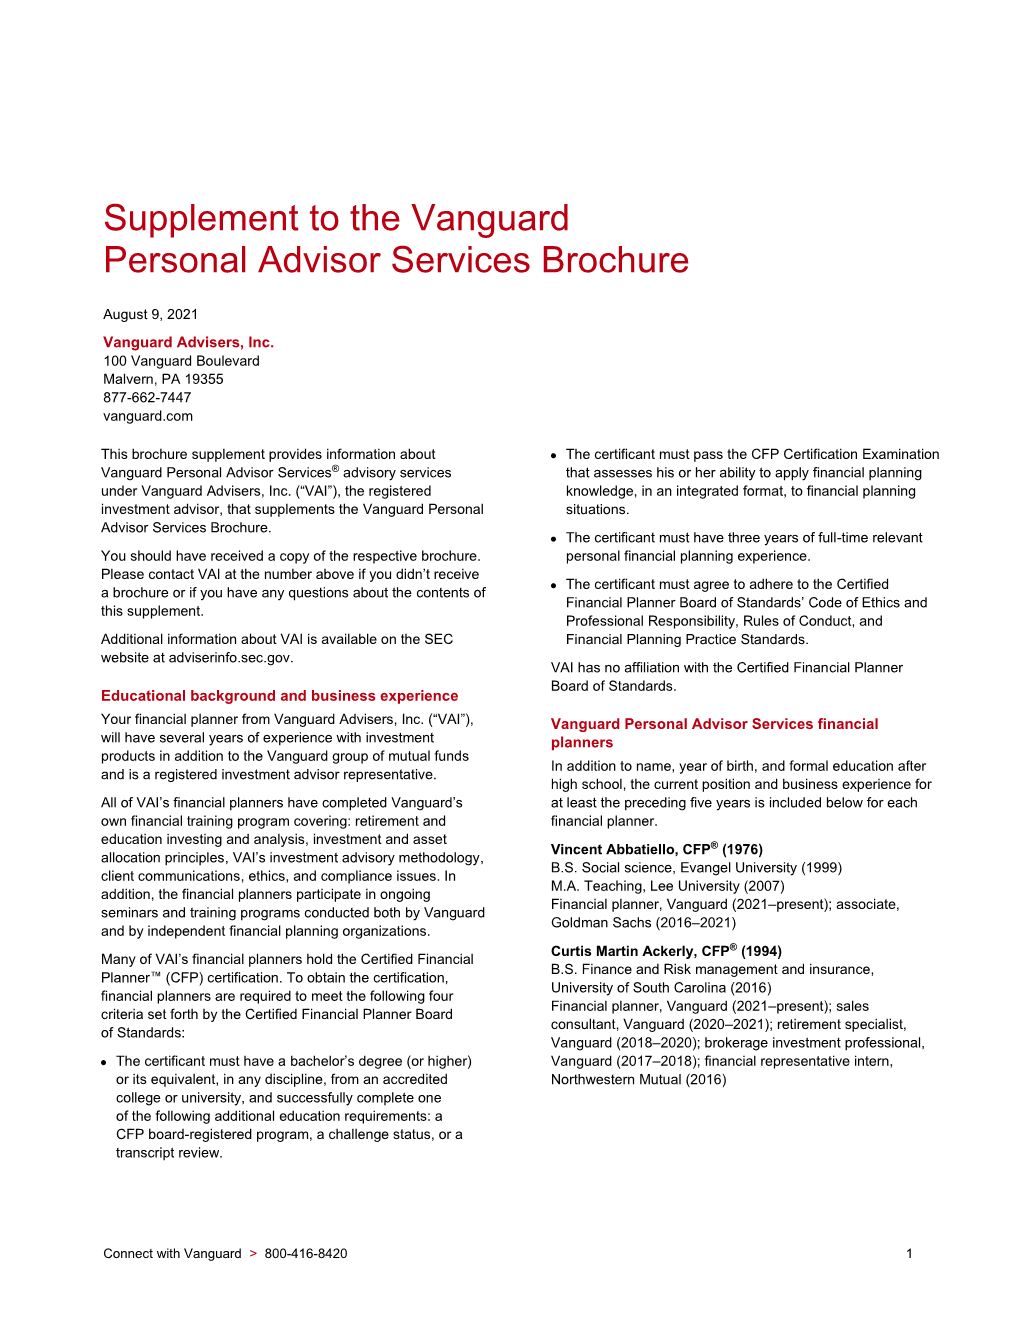 Supplement to the Vanguard Personal Advisor Services Brochure